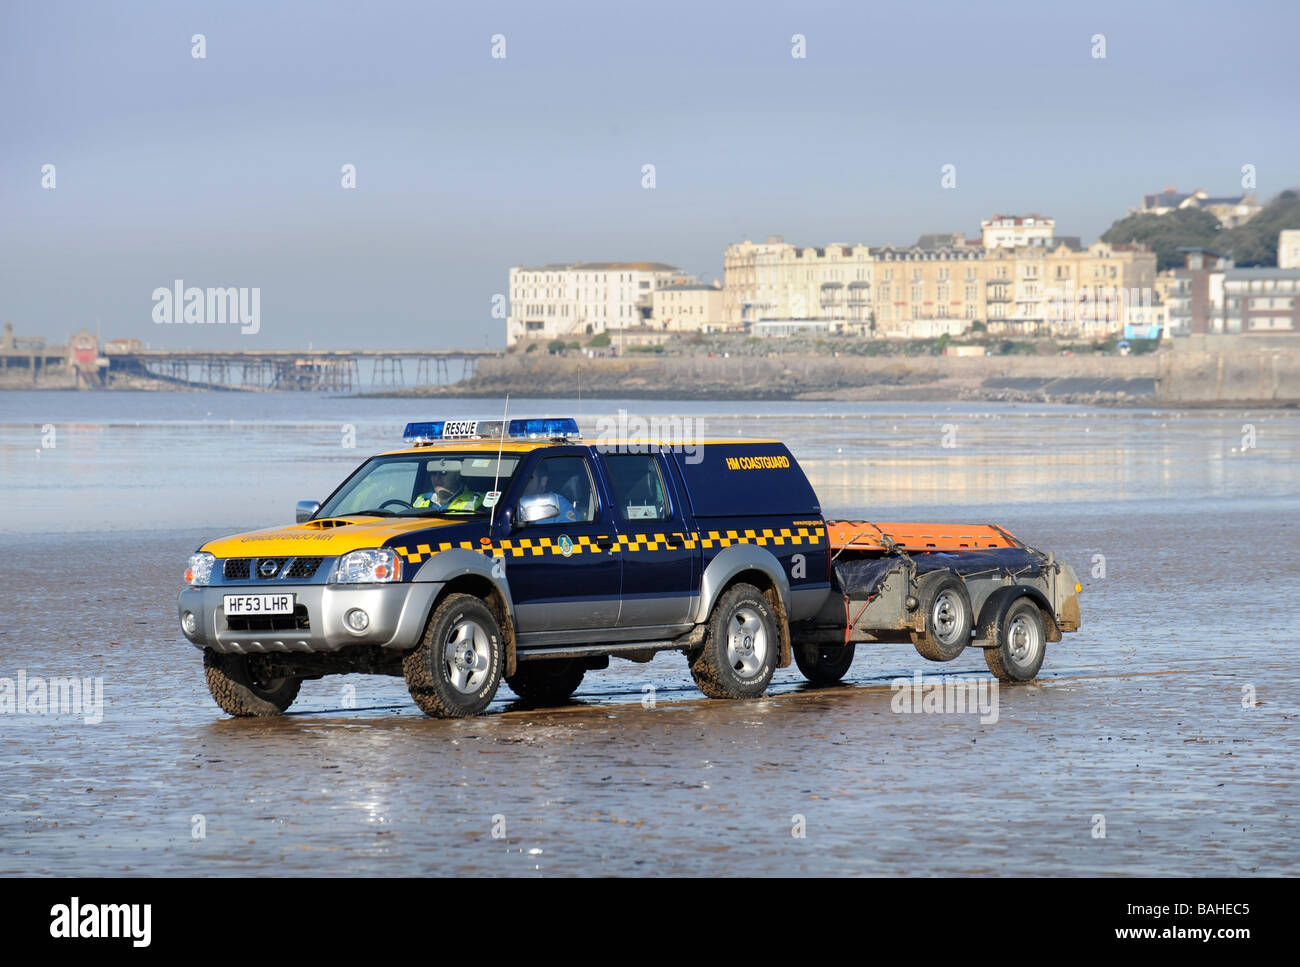 A COASTGUARD VEHICLE CROSSING THE SAND ON THE BEACH AT WESTON SUPER MARE SOMERSET UK Stock Photo